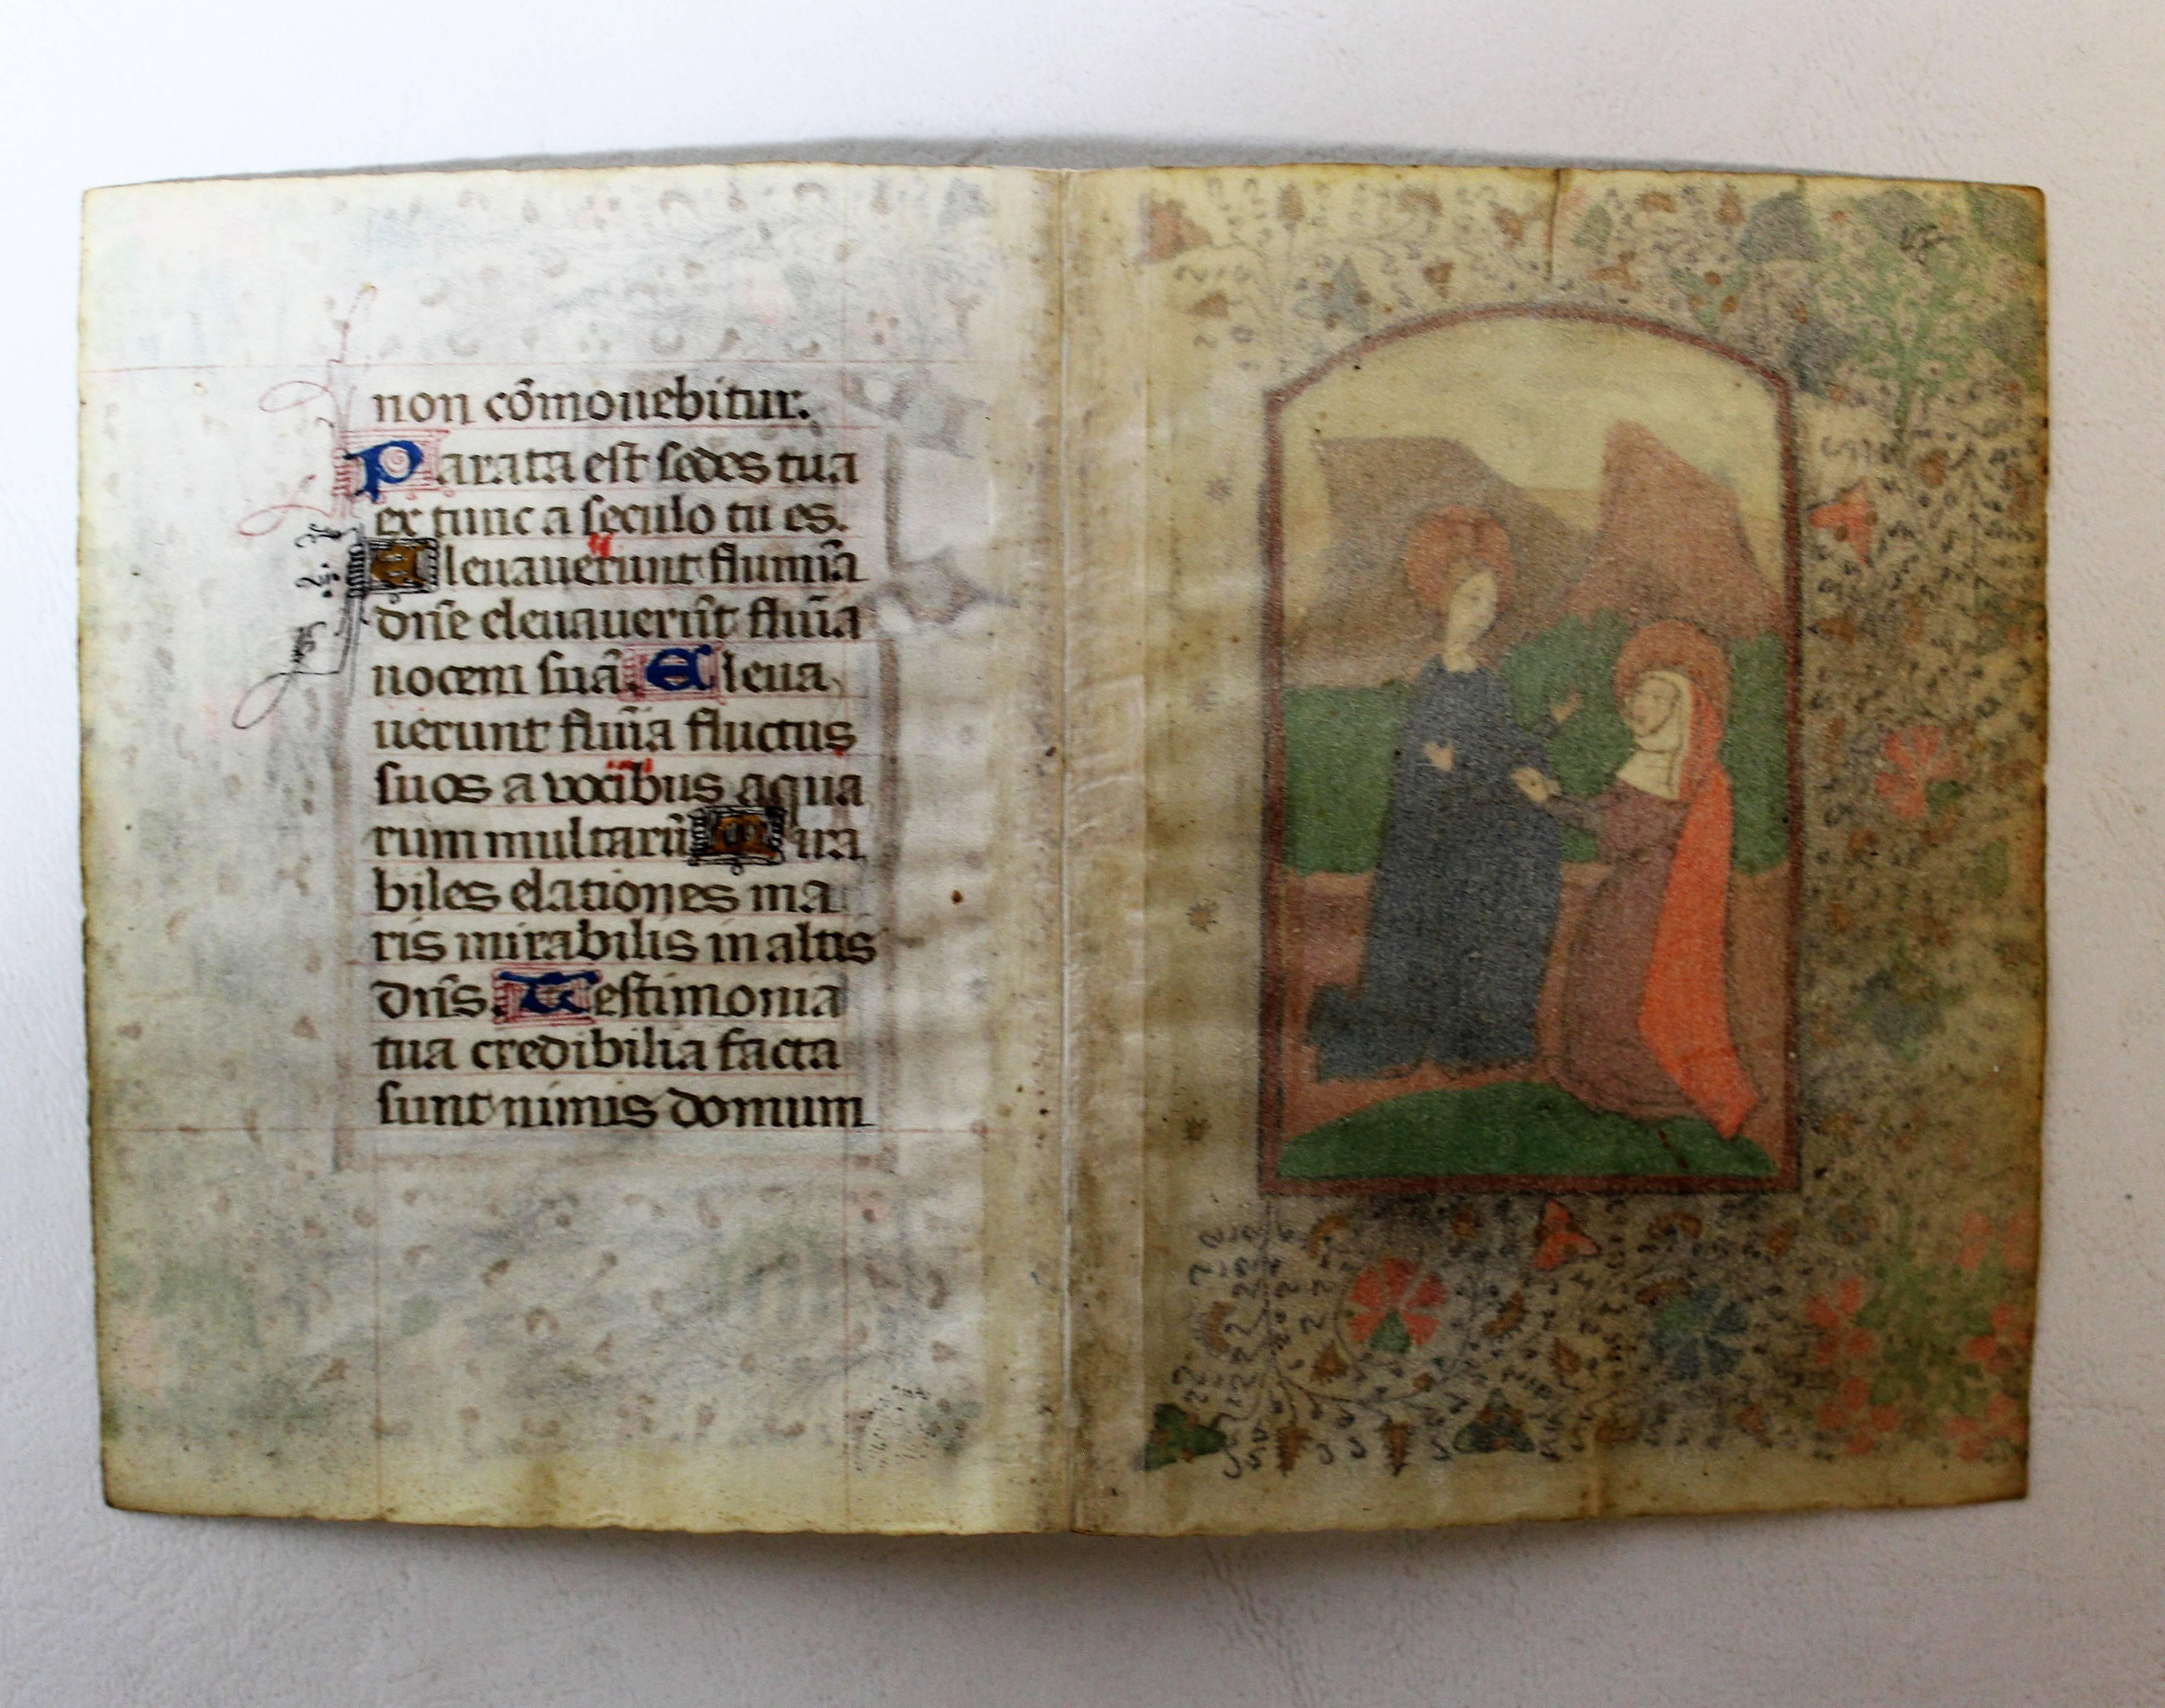 Dutch Medieval Illuminated Manuscript and Miniature Painting from the Book of Hours